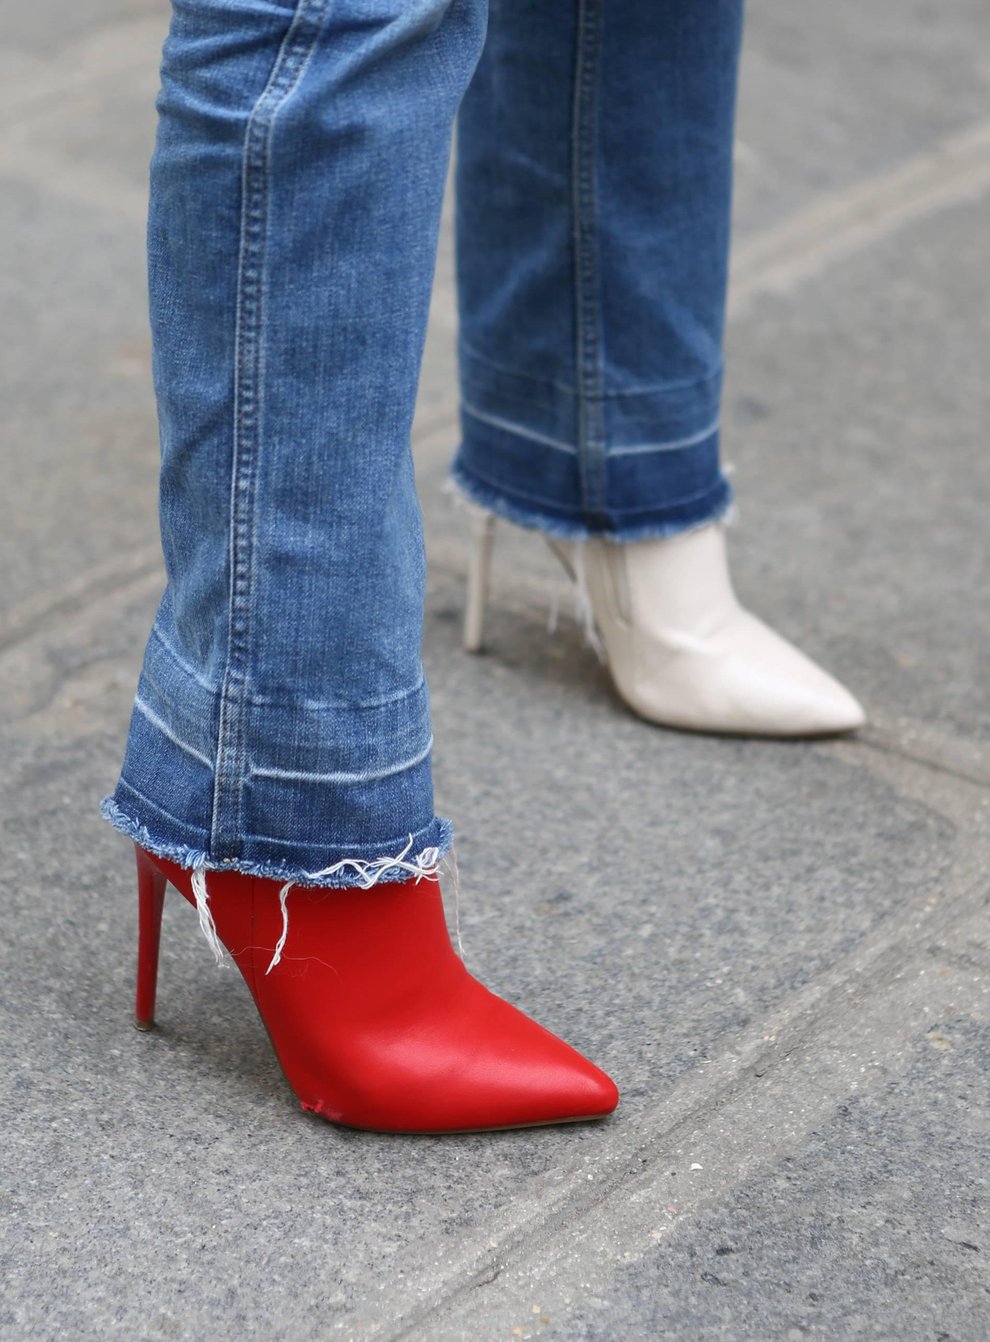 A fashionista wearing mismatched Celine boots during Paris Fashion Week (Alamy/PA)